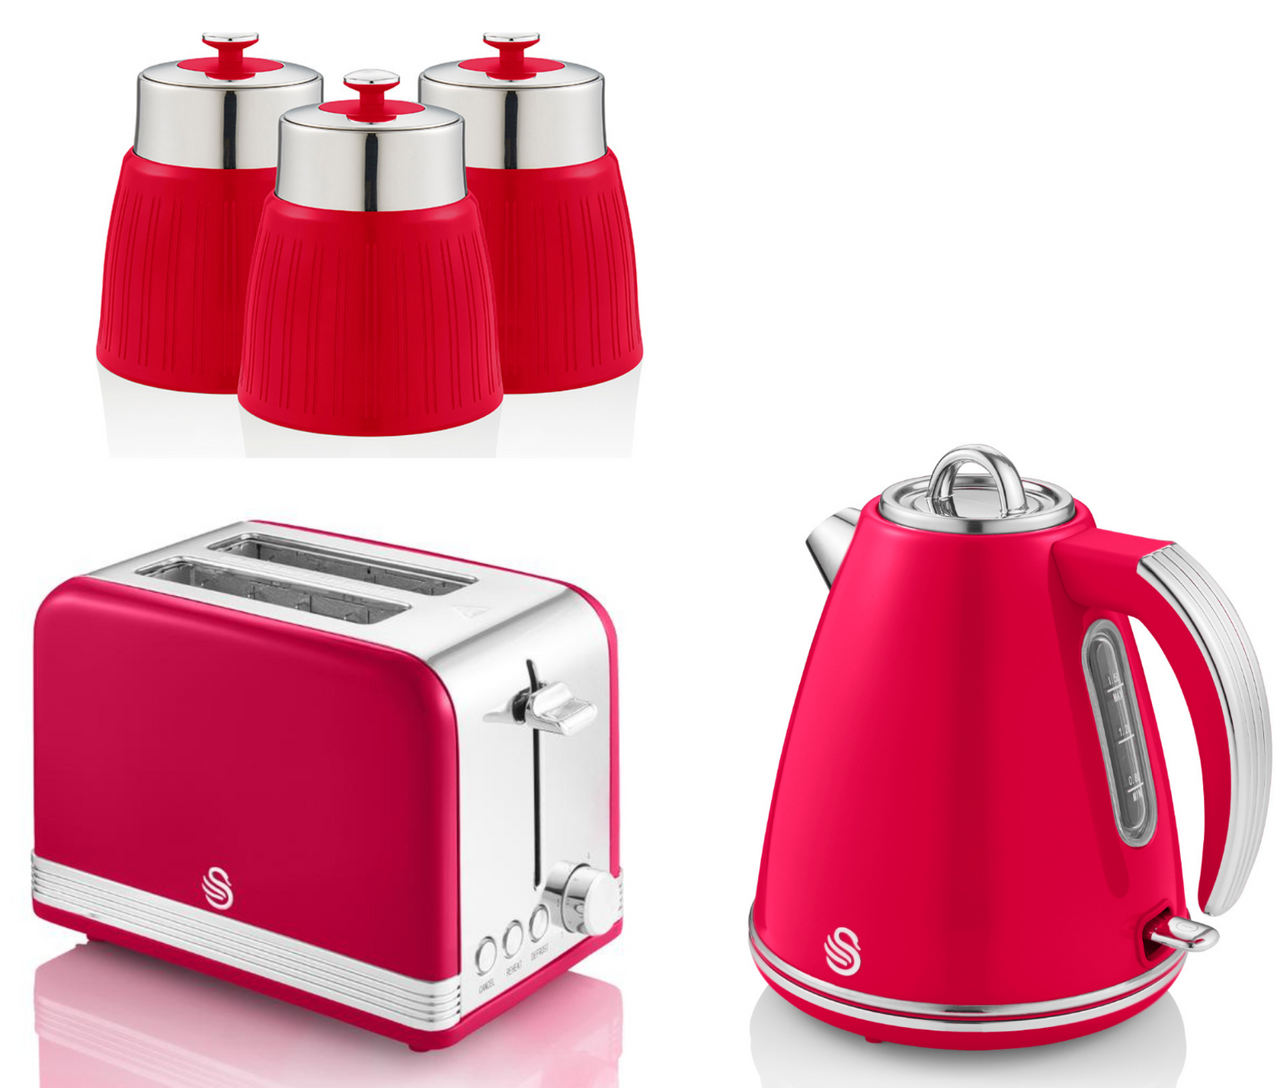 Swan Retro Red Jug Kettle 2 Slice Toaster & 3 Canisters Matching Kitchen Set